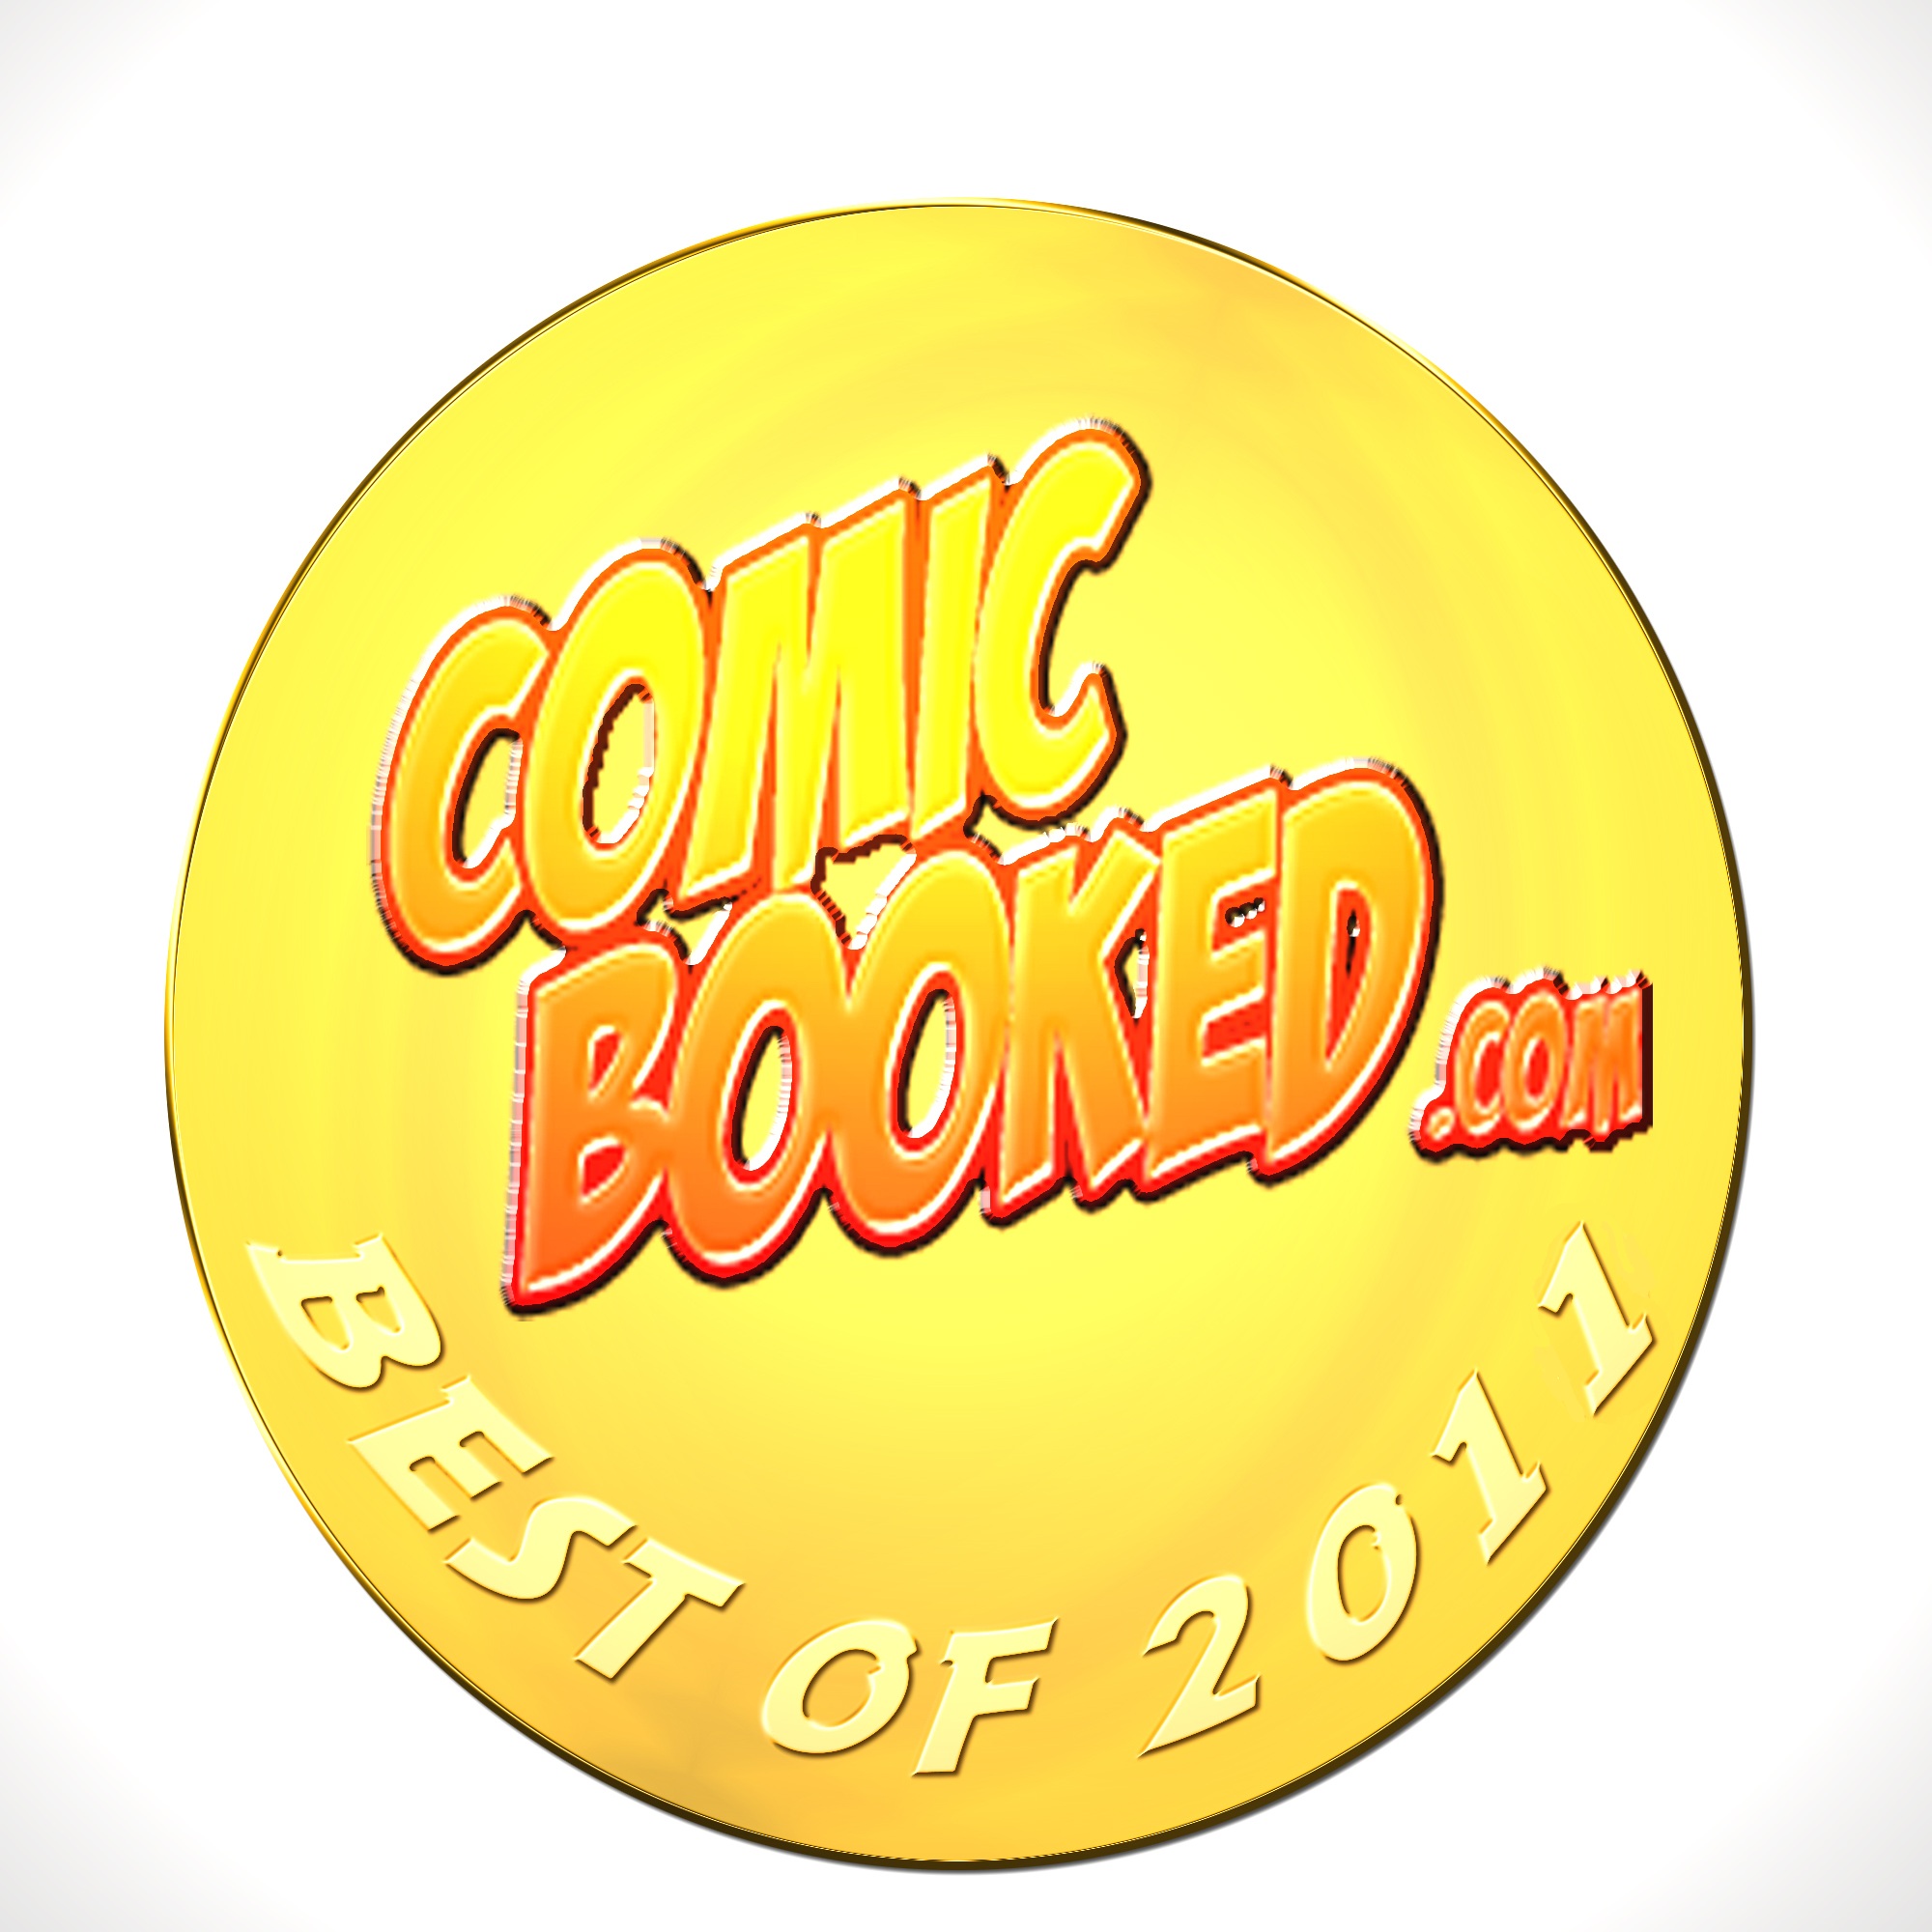 Comic Booked Best of 2011